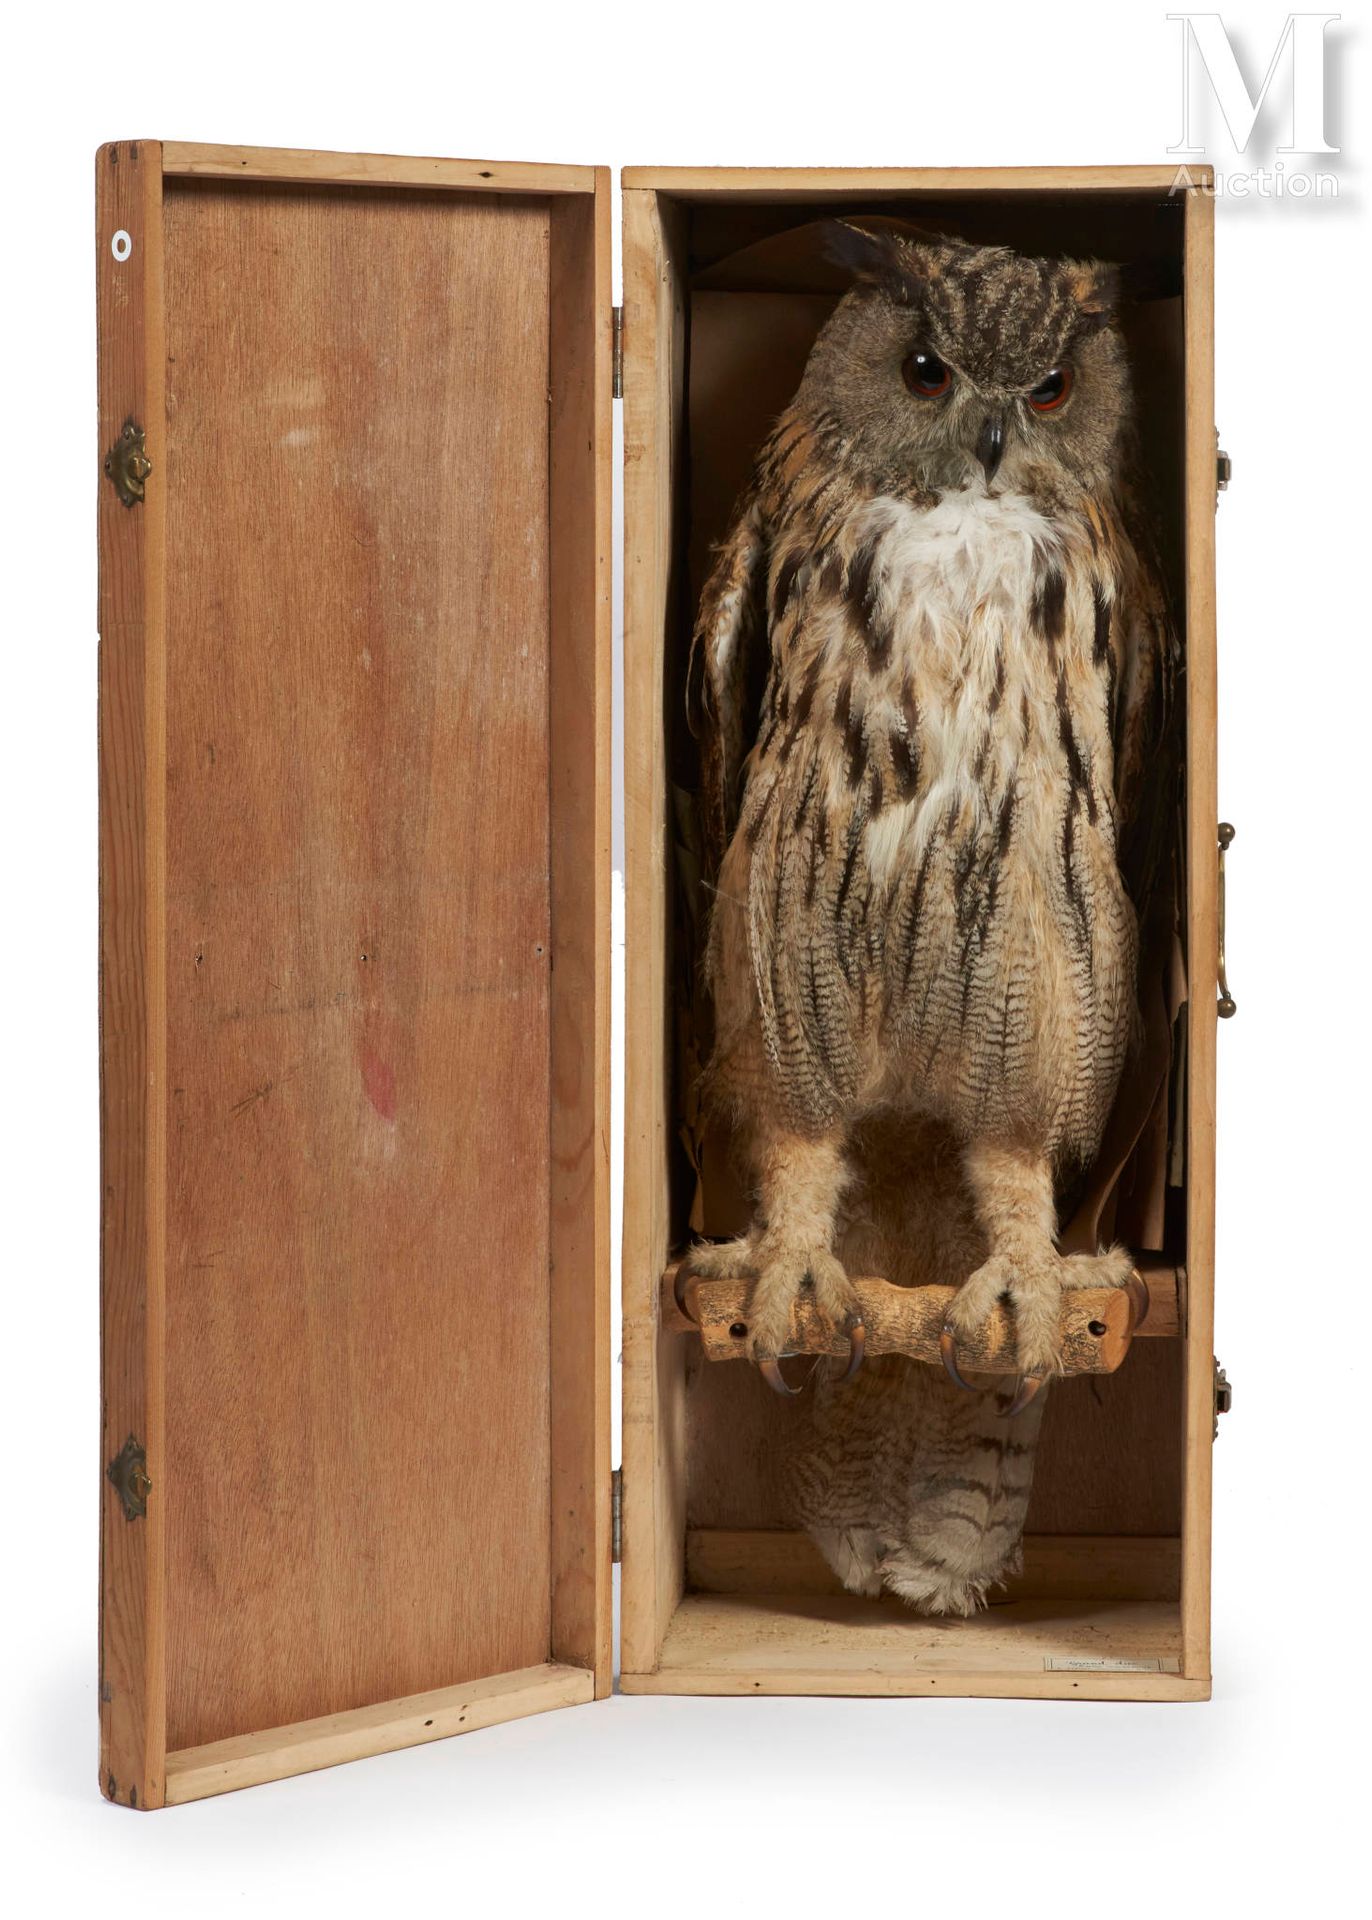 HIBOU GRAND-DUC Caller.

Presented in its wooden transport box.

Height: 64 cm.
&hellip;